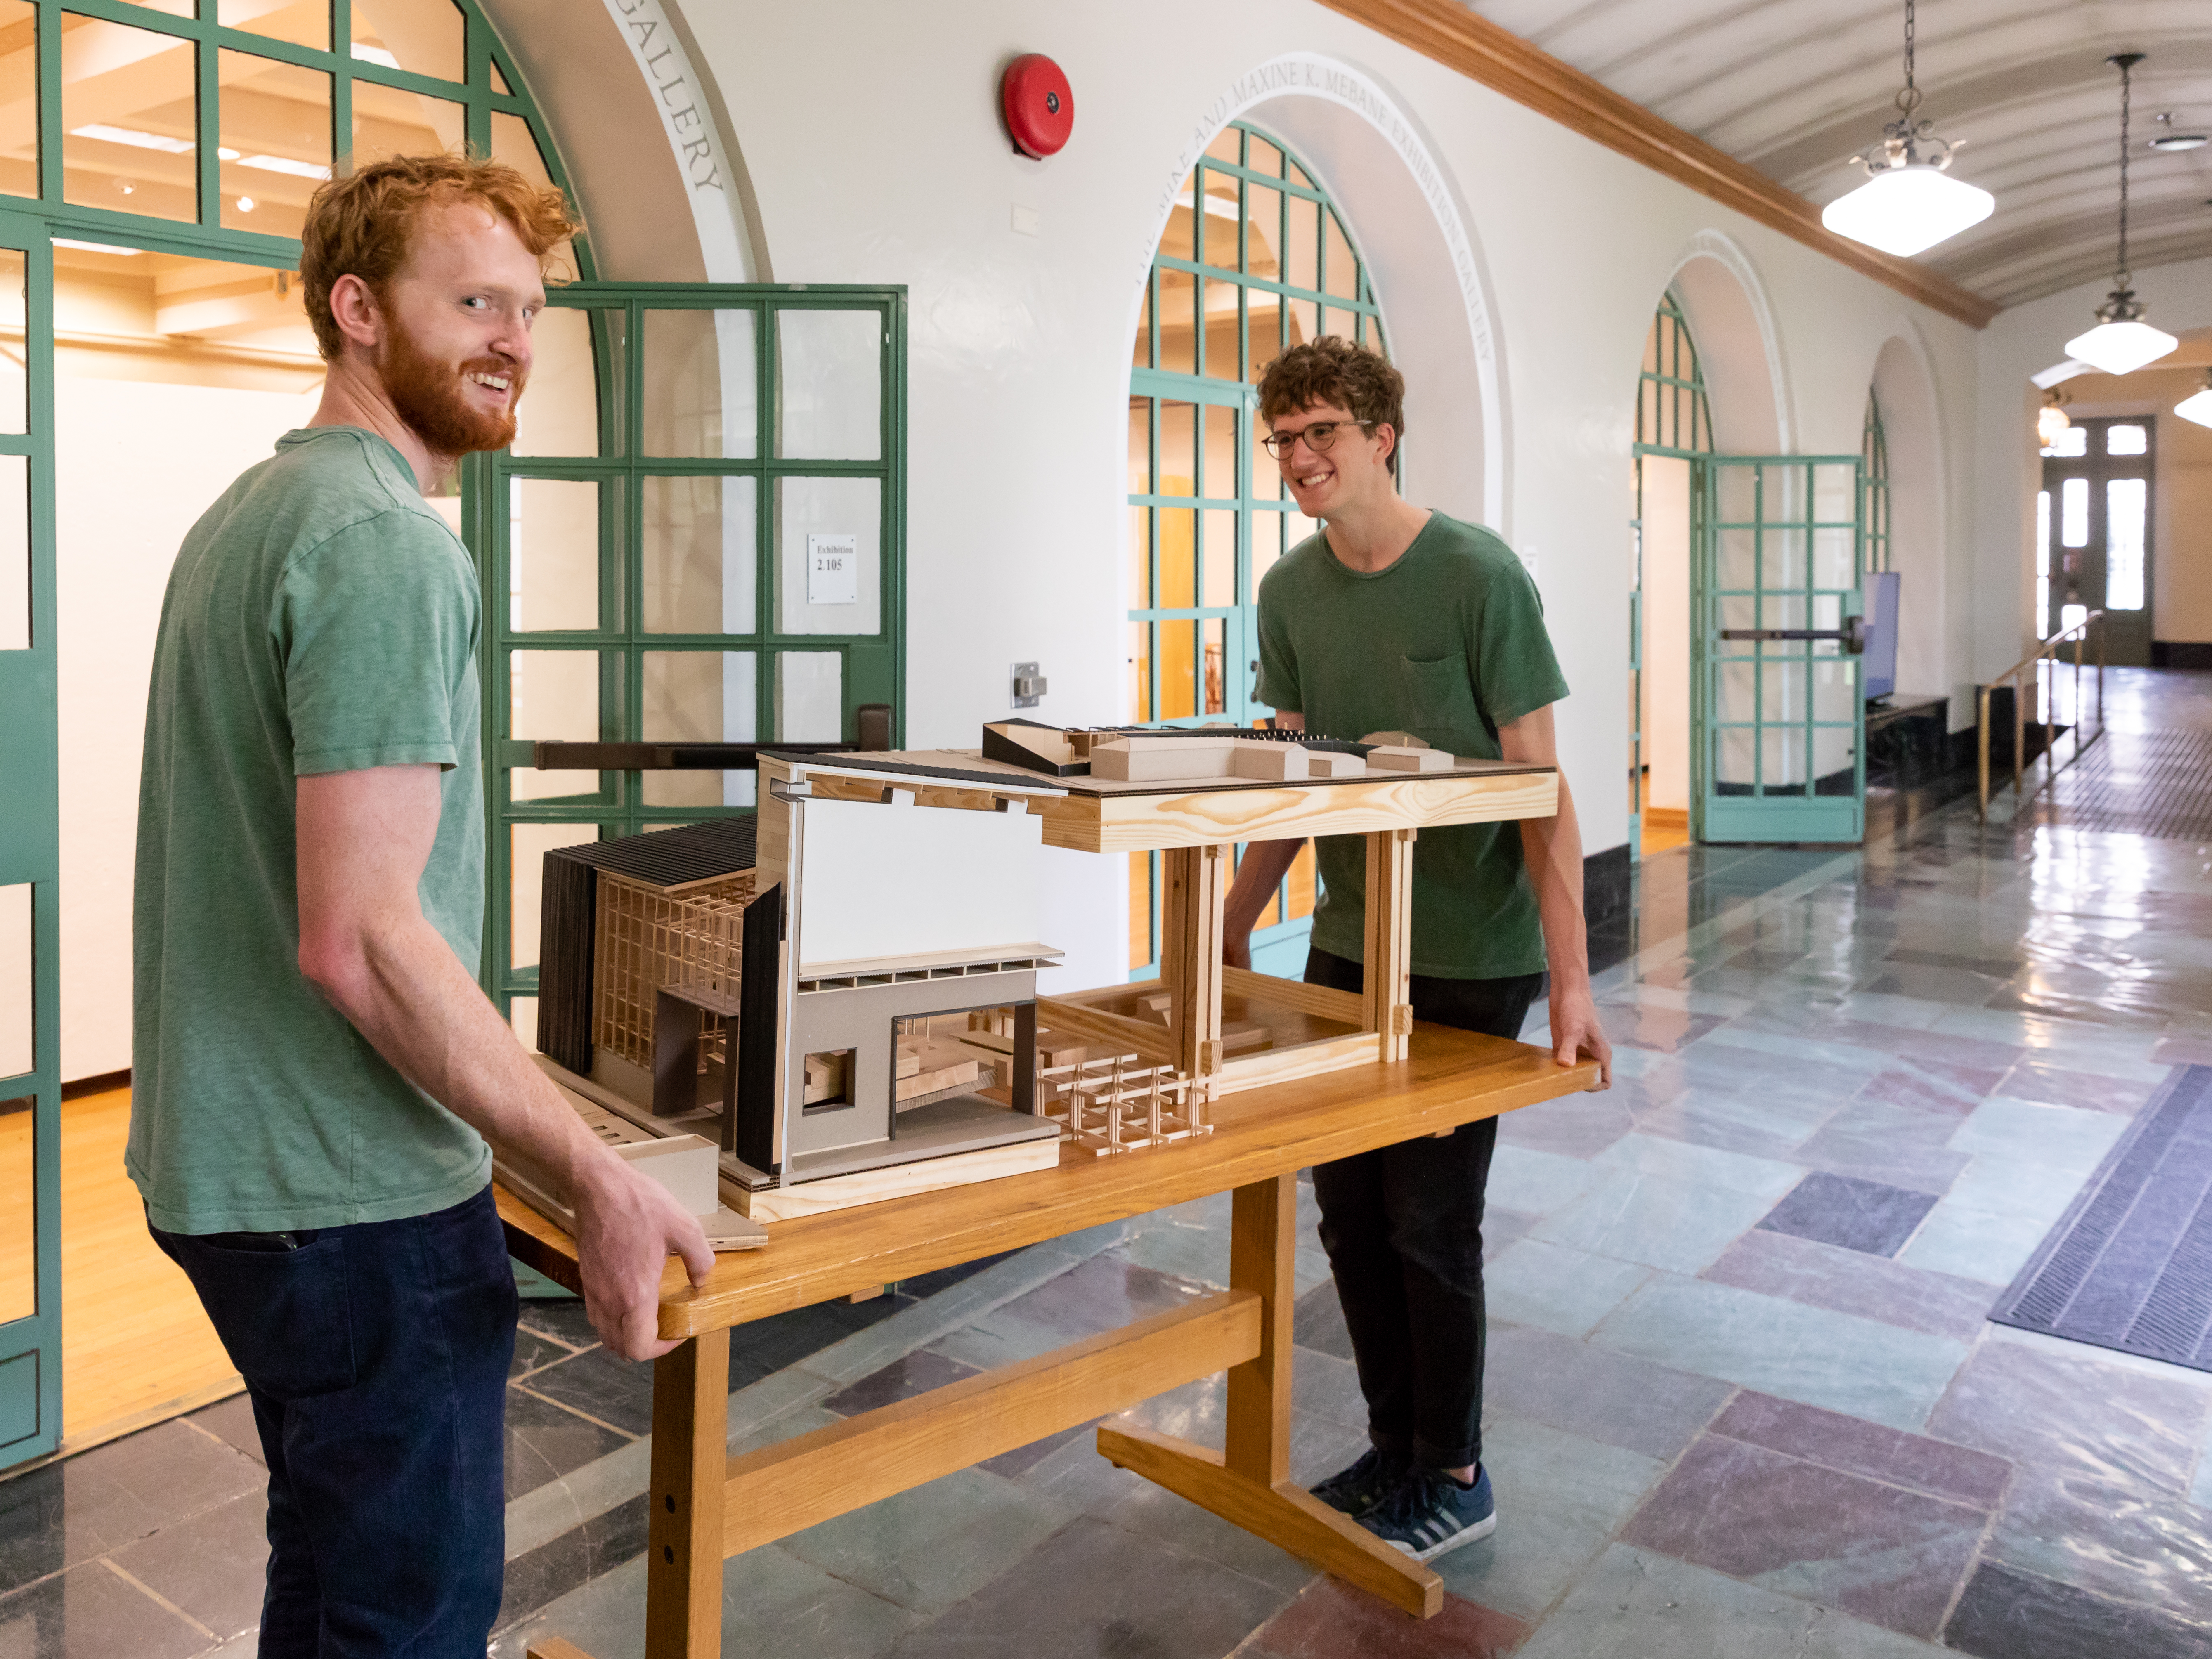 Students moving a table with a large architectural model